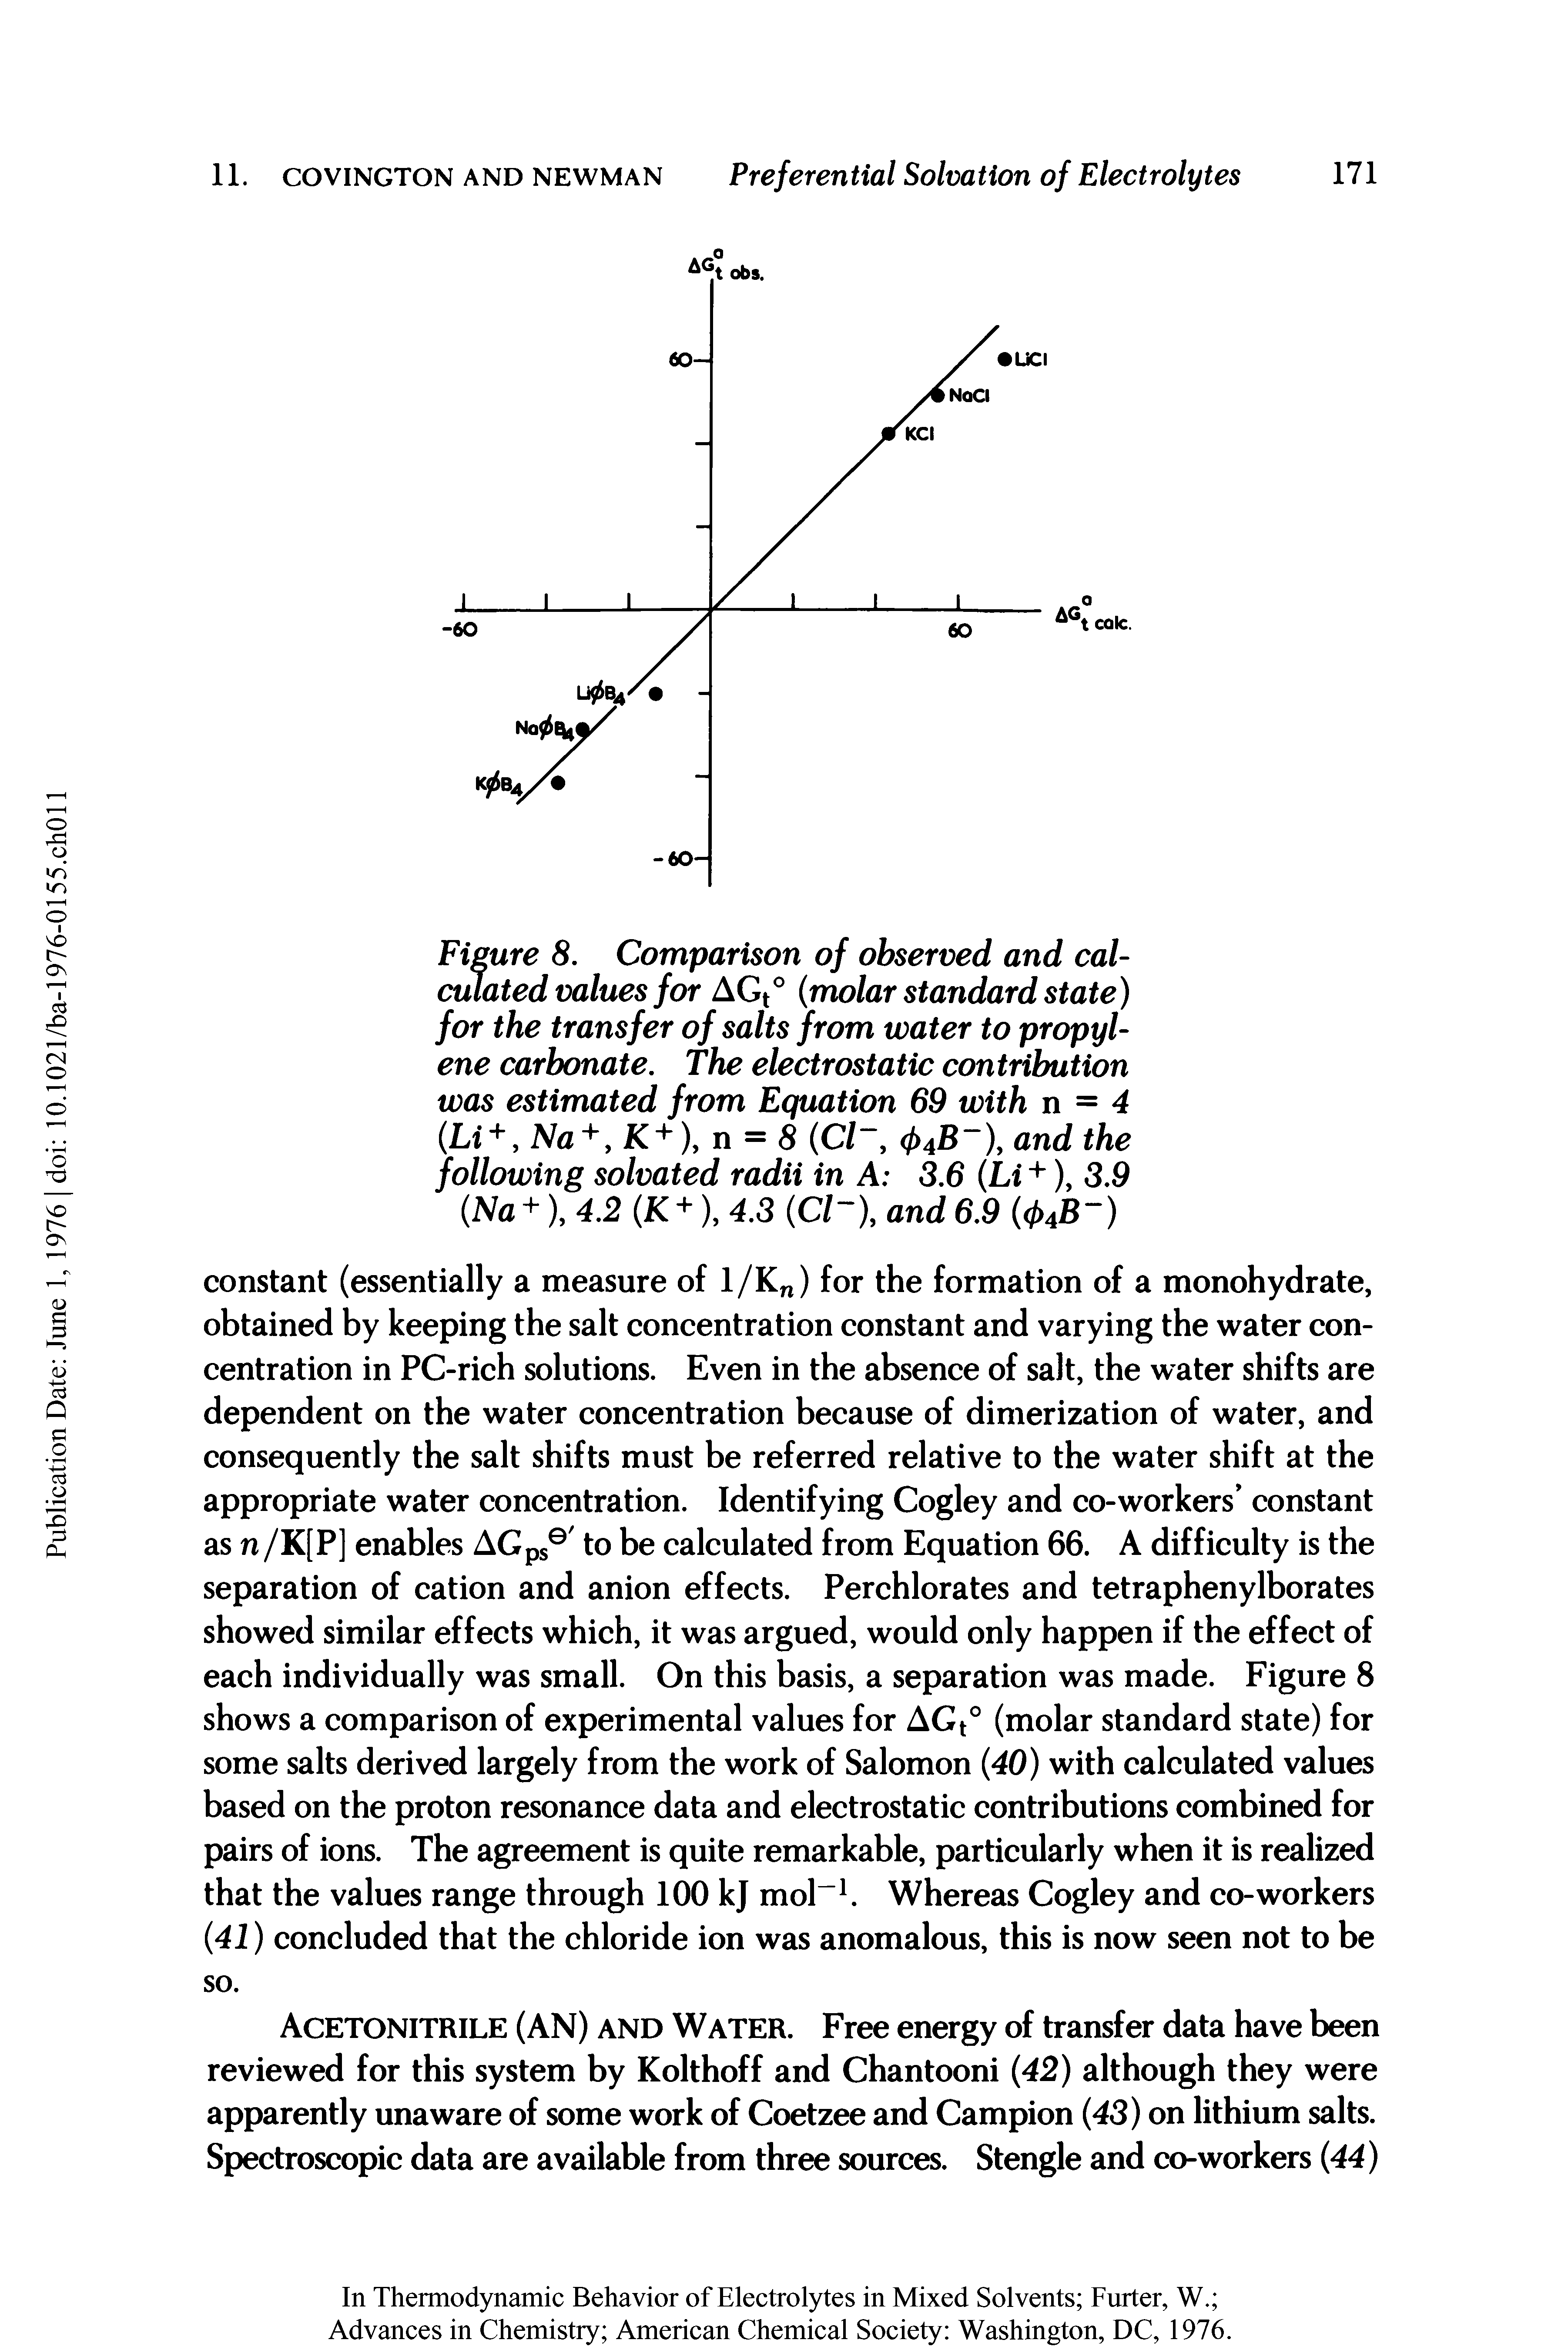 Figure 8. Comparison of observed and calculated values for AGt° (molar standard state) for the transfer of salts from water to propylene carbonate. The electrostatic contribution was estimated from Equation 69 with n = 4 (Li+, Na+, K + ), n = 8 (Cl, 04B ), and the following solvated radii in A 3.6 (Li +), 3.9 (Na +), 4.2 (K +), 4.3 (Cl and 6.9 (<t>AB )...